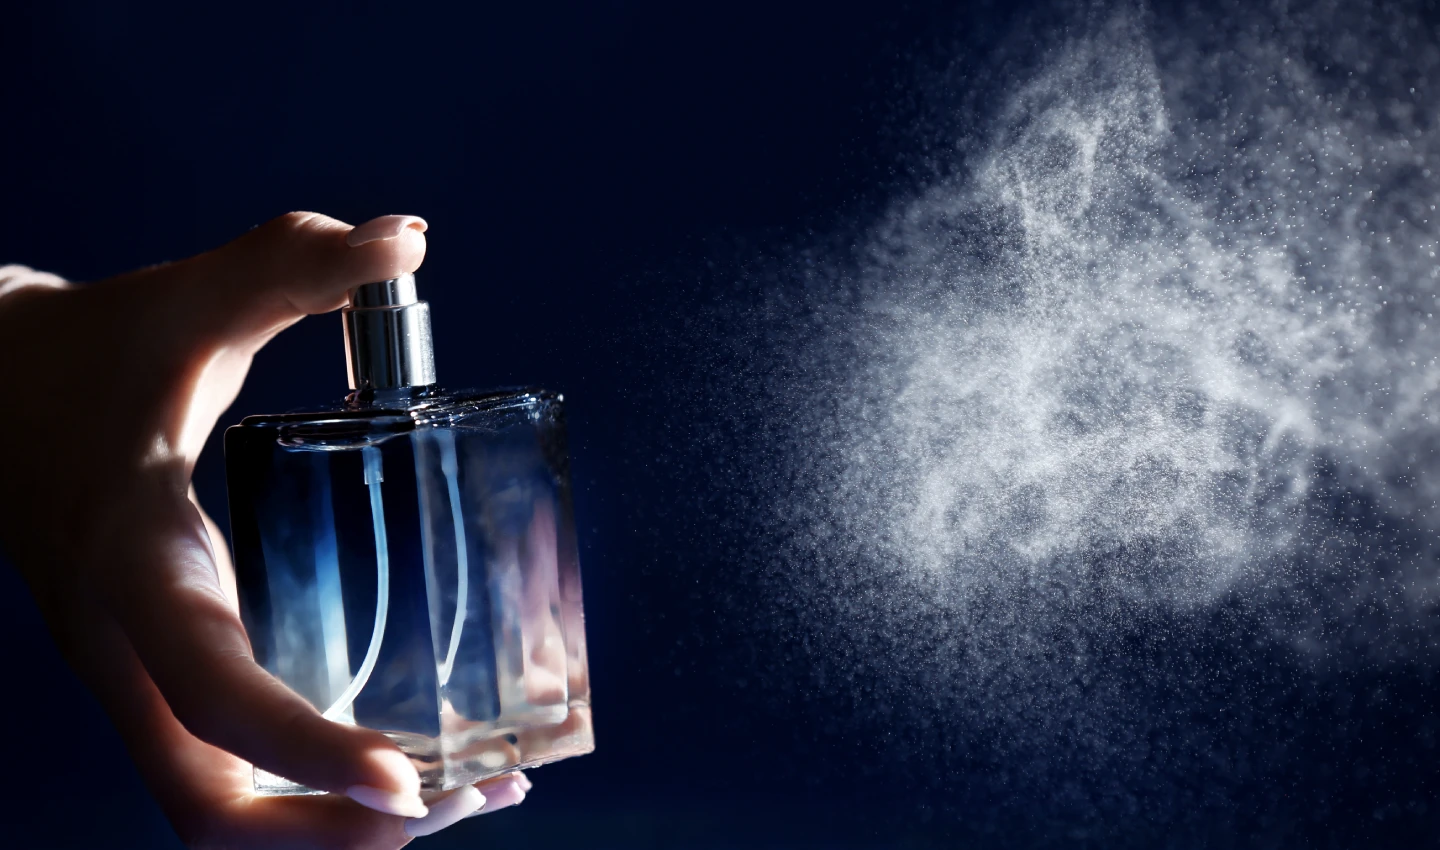 An illustration of a perfume bottle spraying, capturing the essence of scent diffusion as part of the Ultimate Perfume Guide